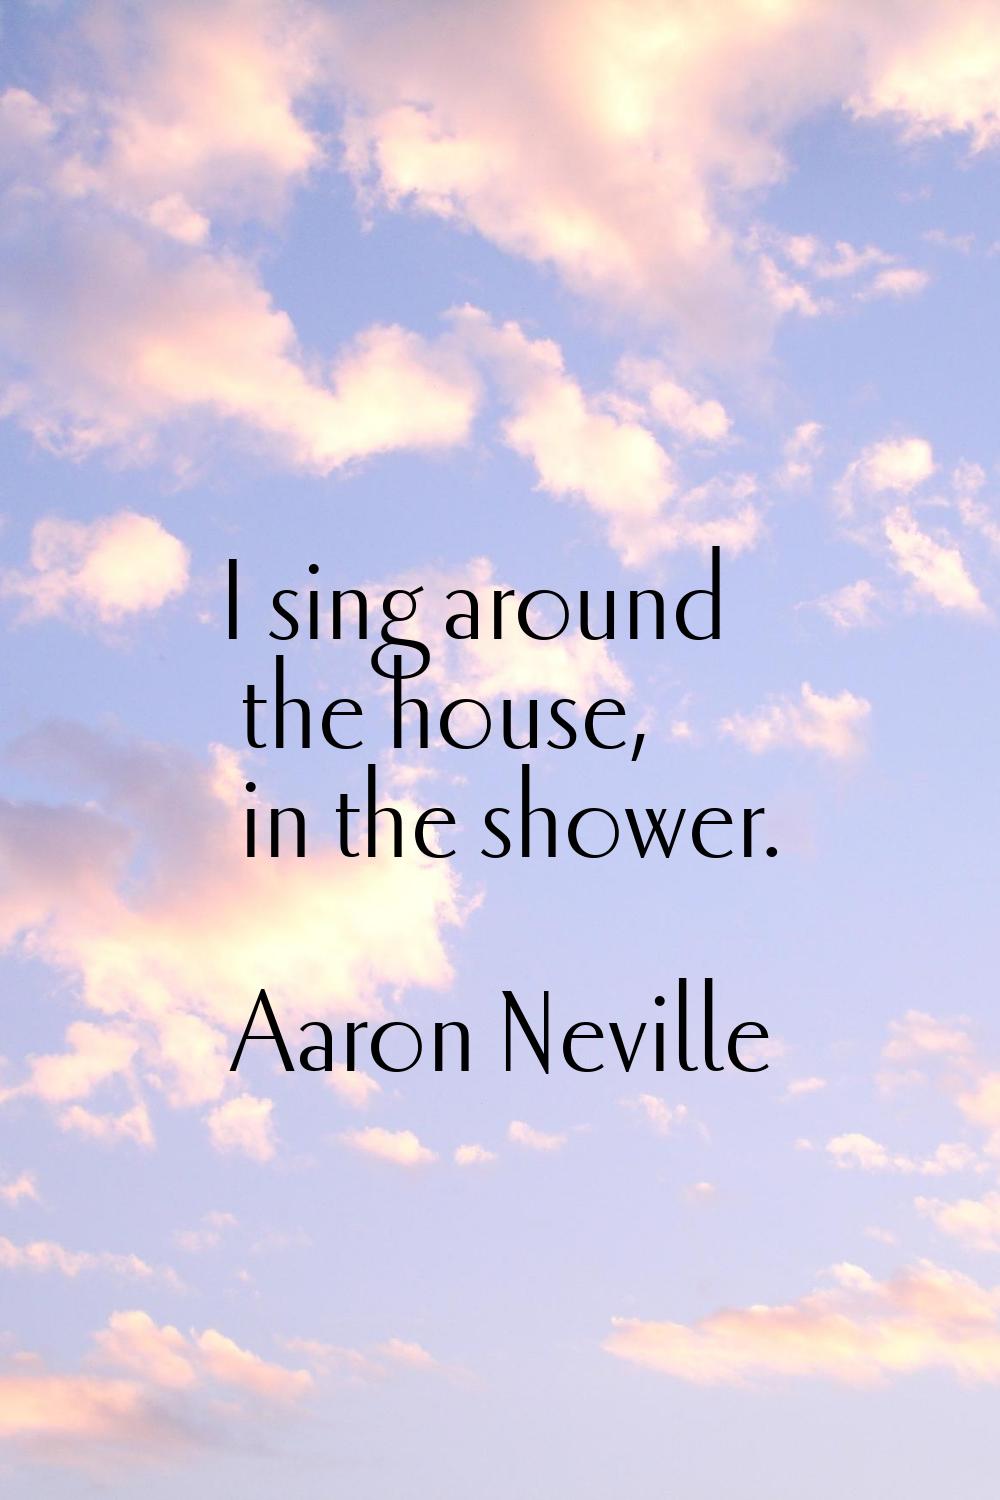 I sing around the house, in the shower.